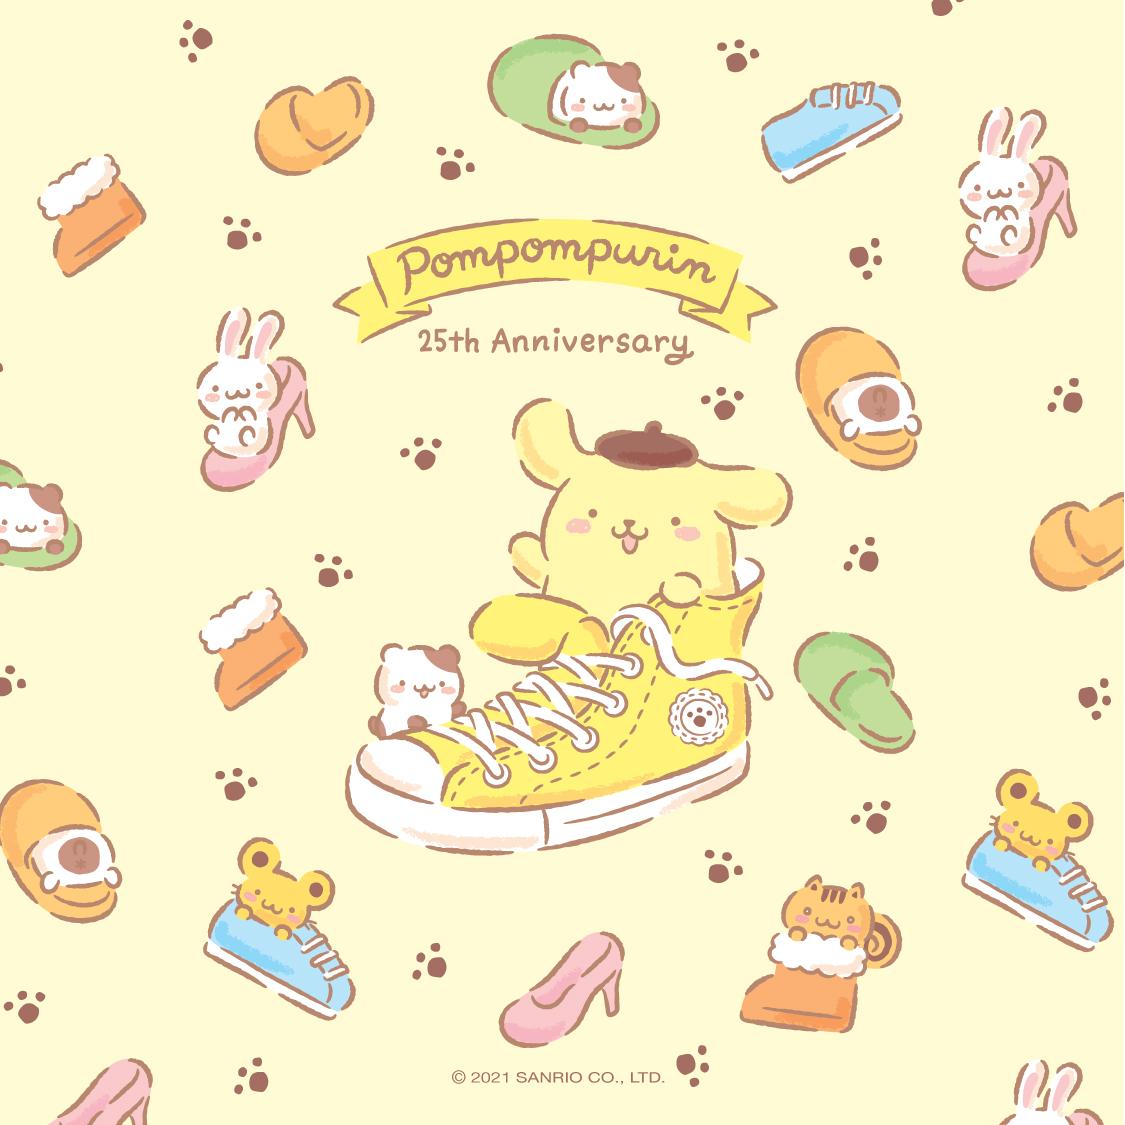 Sanrio's Pompompurin is seen in a Converse sneaker surrounded by other cute illustrations of the character. - Sanrio